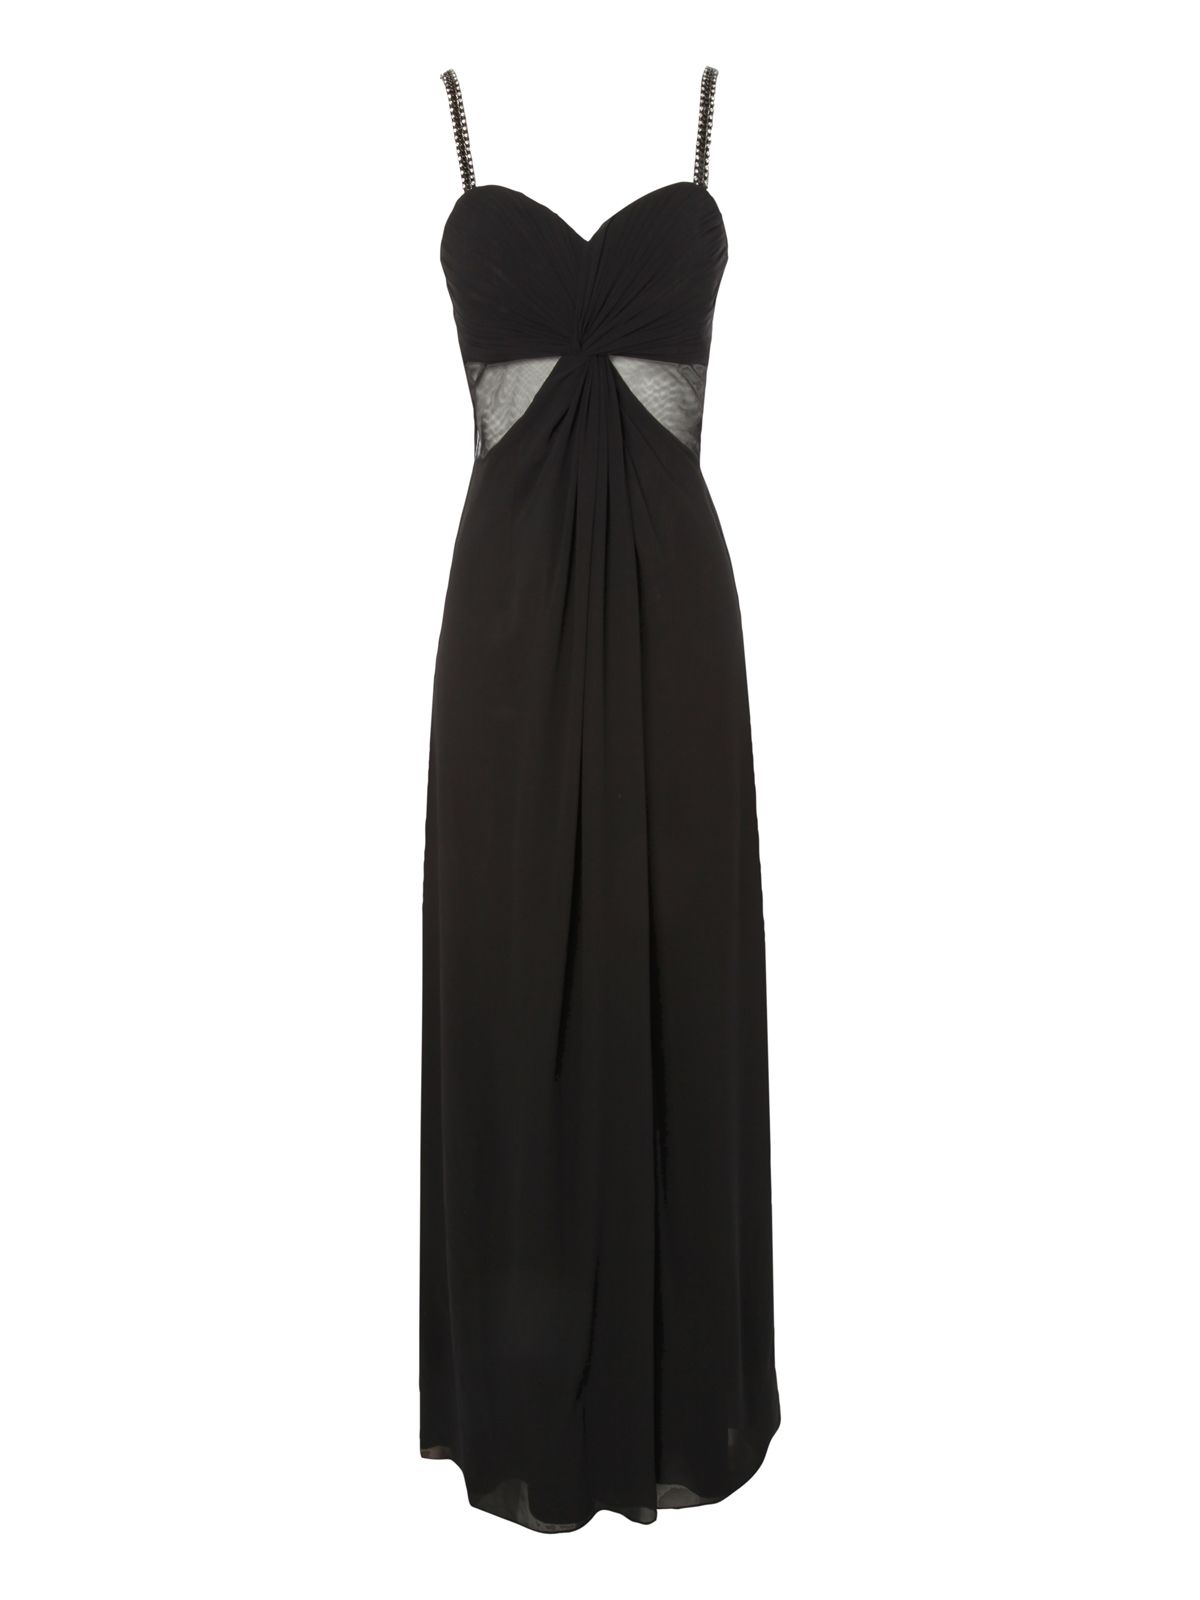 Jane norman Knot Front Maxi Dress in Black | Lyst